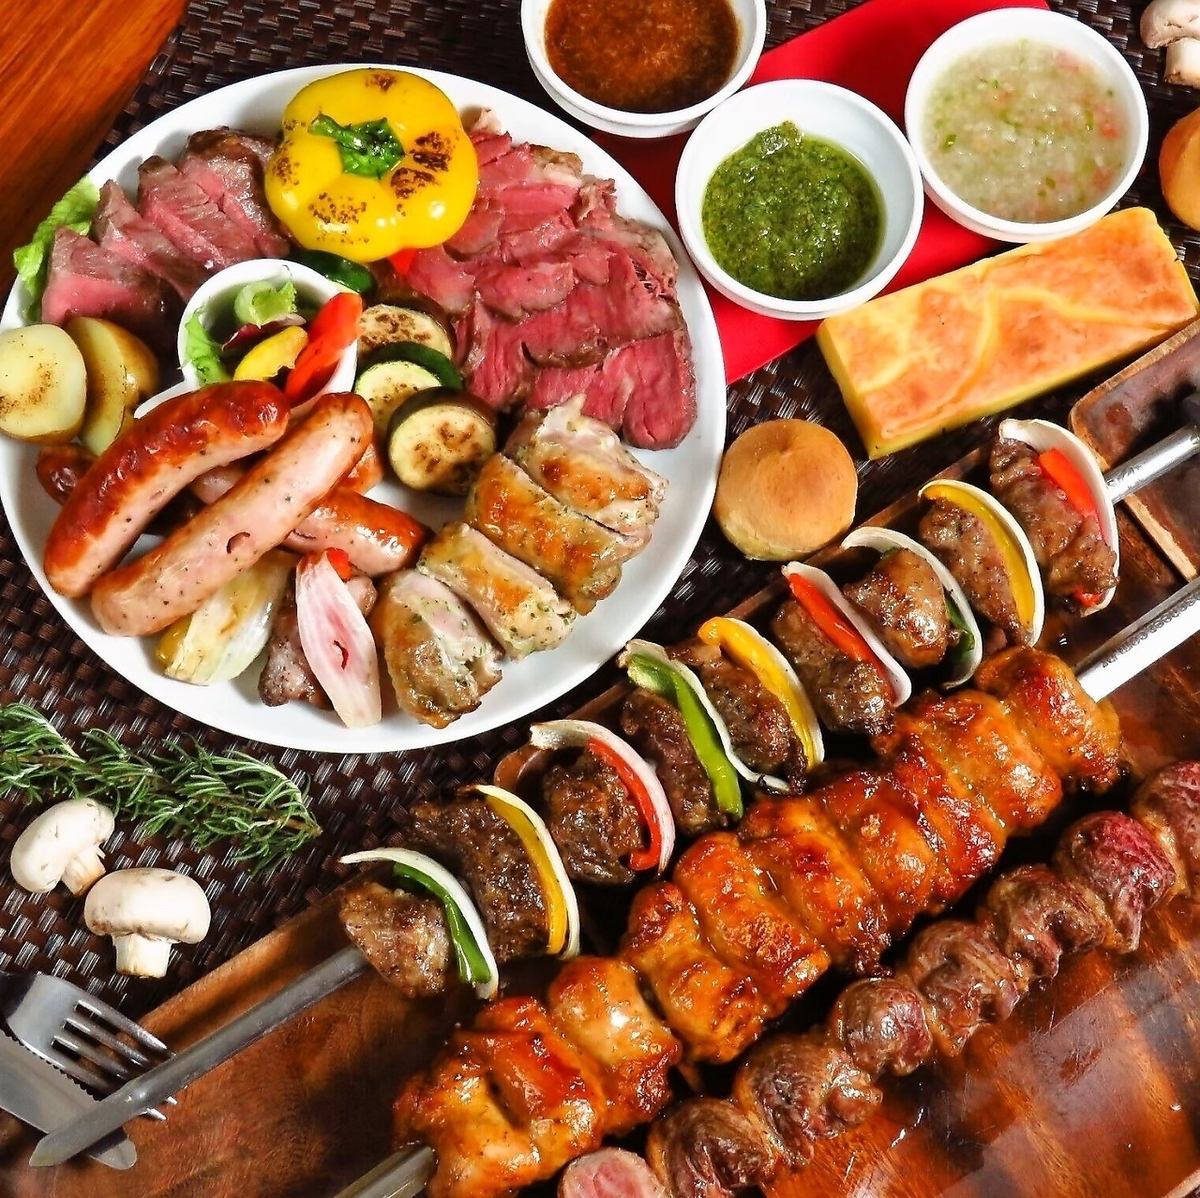 Enjoy as much meat as you like! All-you-can-eat churrasco with 20 varieties!